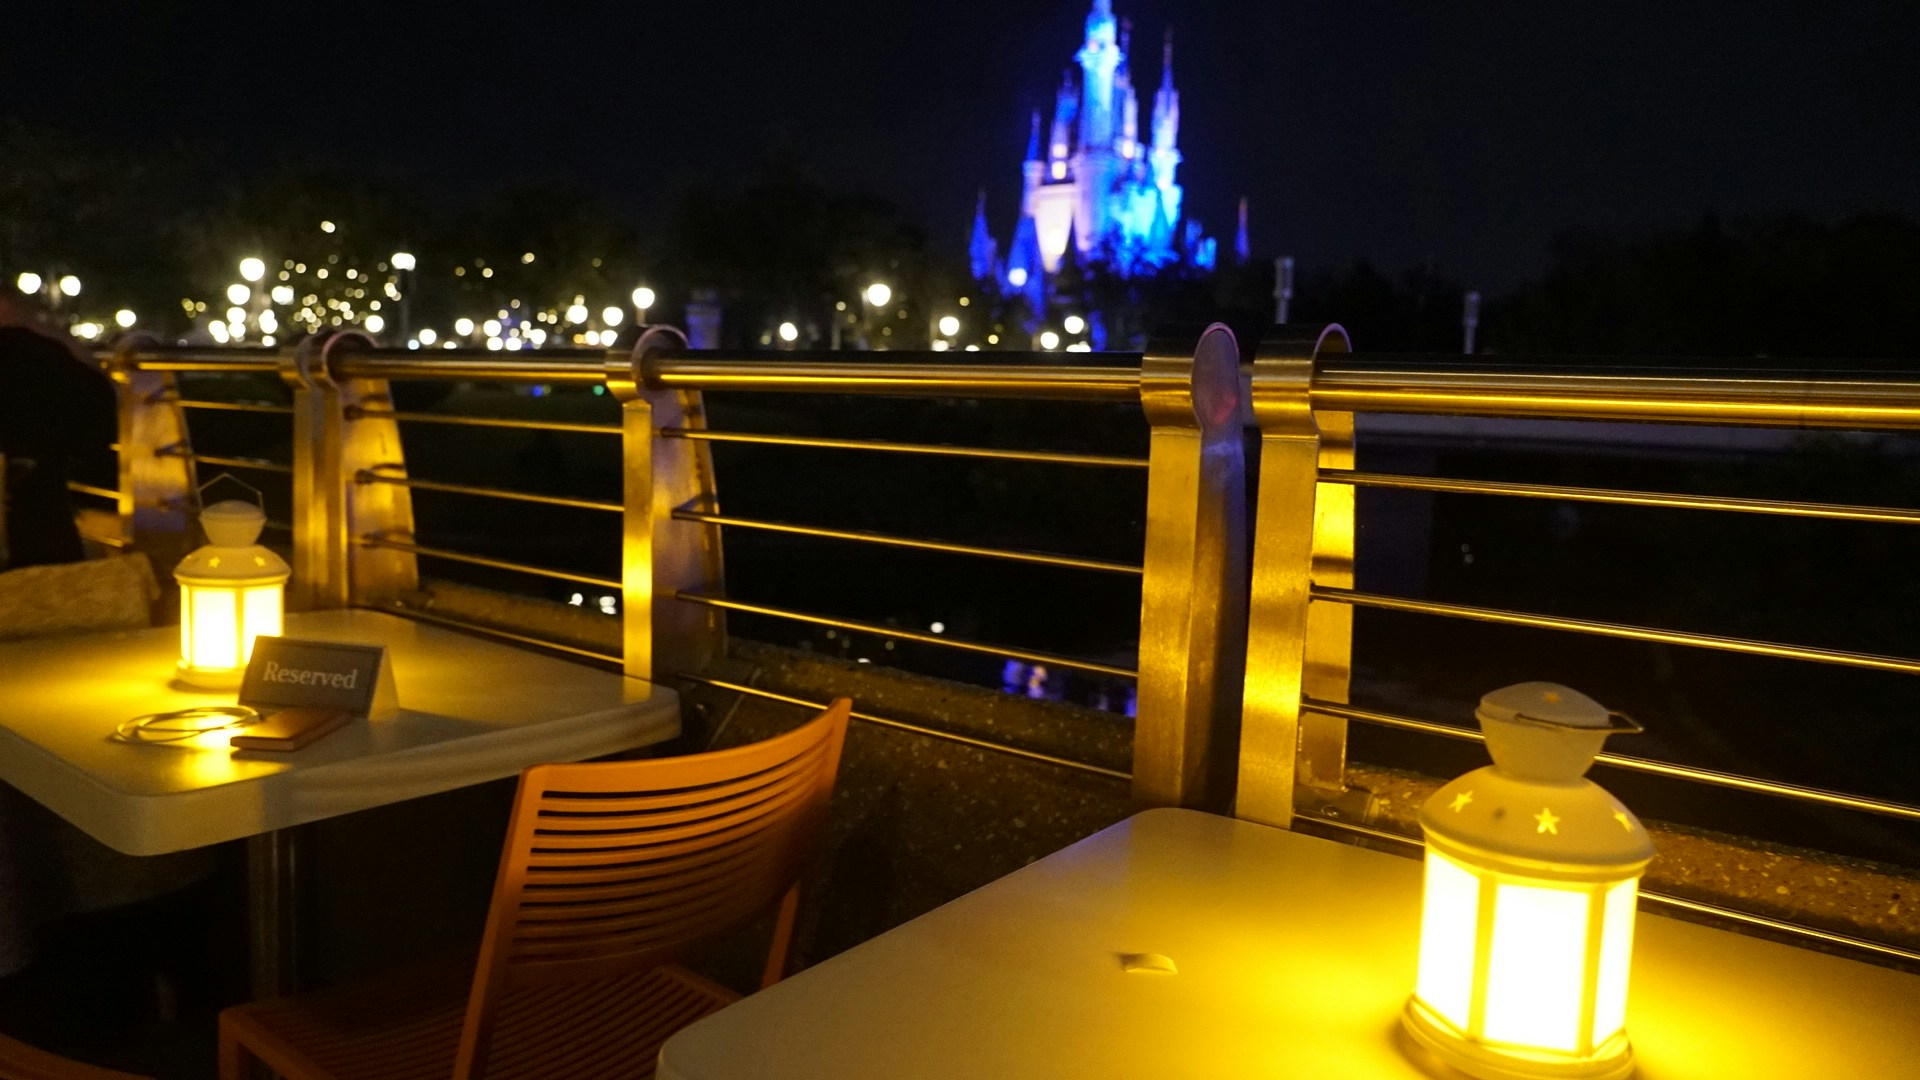 mb2PXNIi tomorrowland terrace dessert party with alcohol happily ever after magic kingdom feb 2020 35.JPG?auto=compress%2Cformat&ixlib=php 1.2